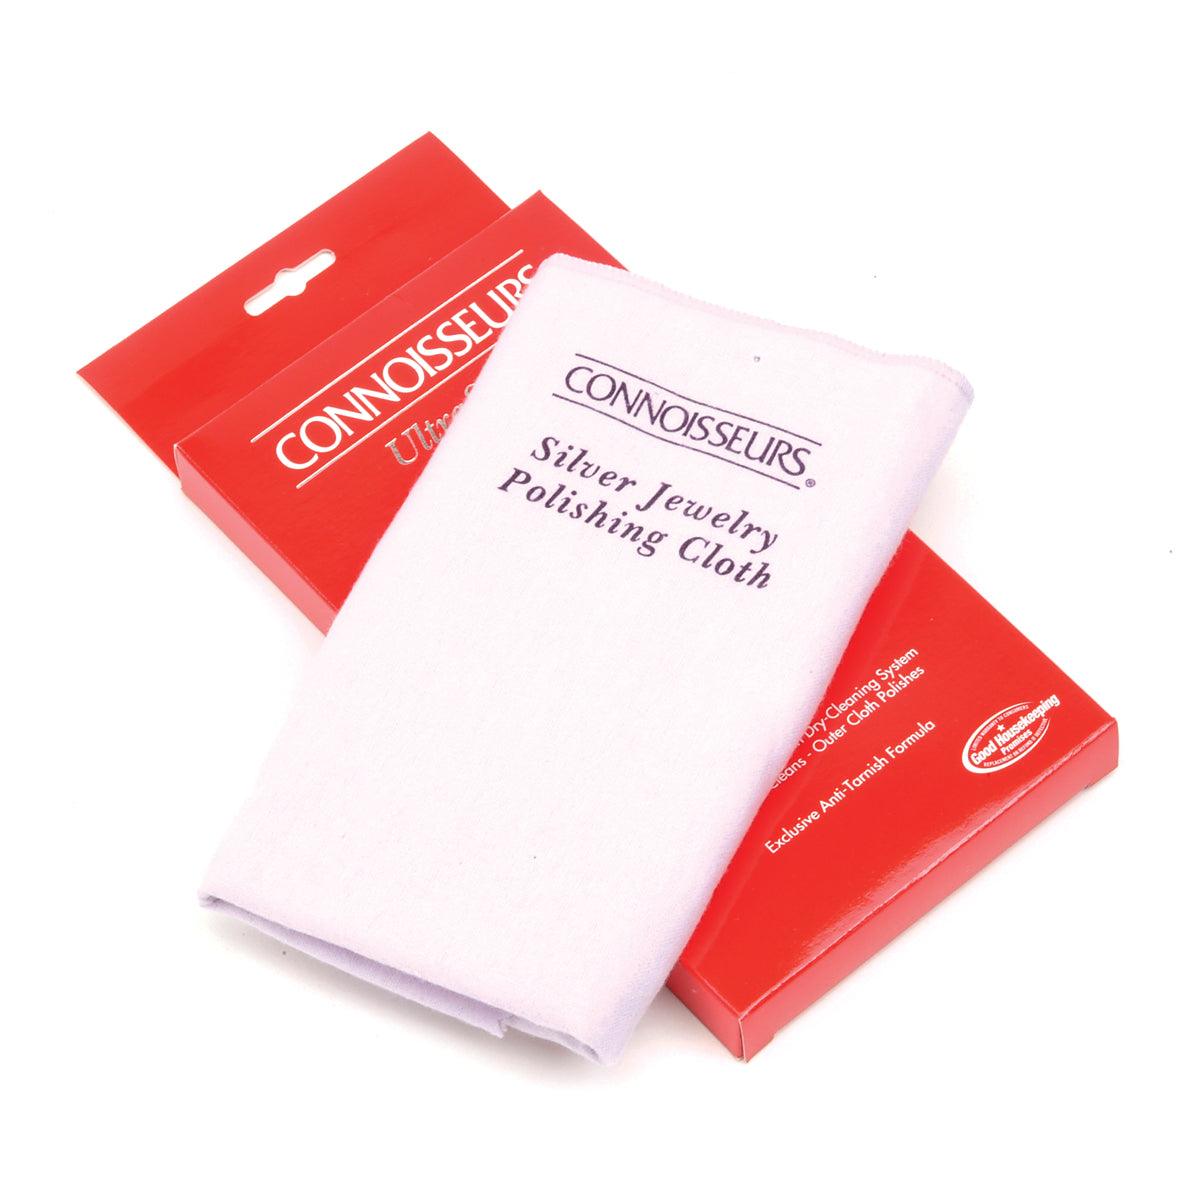 Jewelry Cleaning Cloth Connoisseur Jewelry Cloth Polishing Cloths